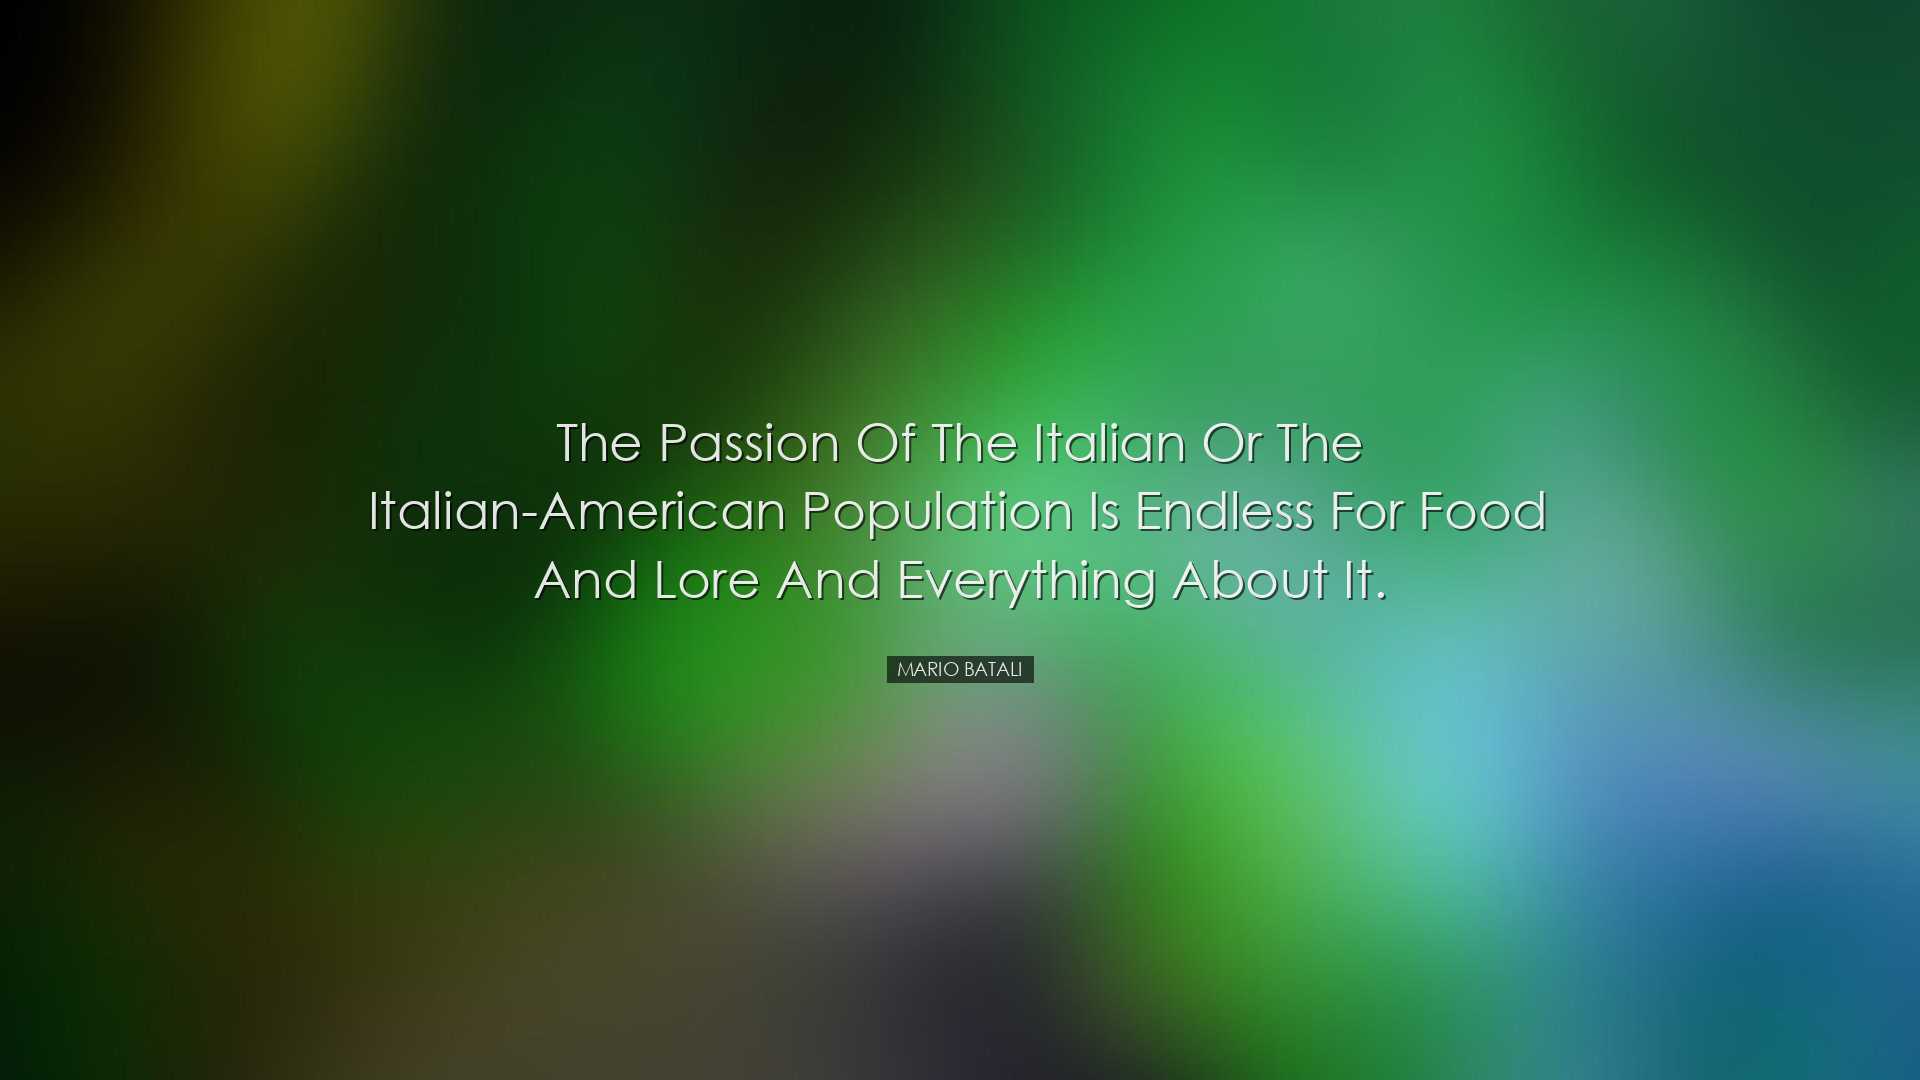 The passion of the Italian or the Italian-American population is e